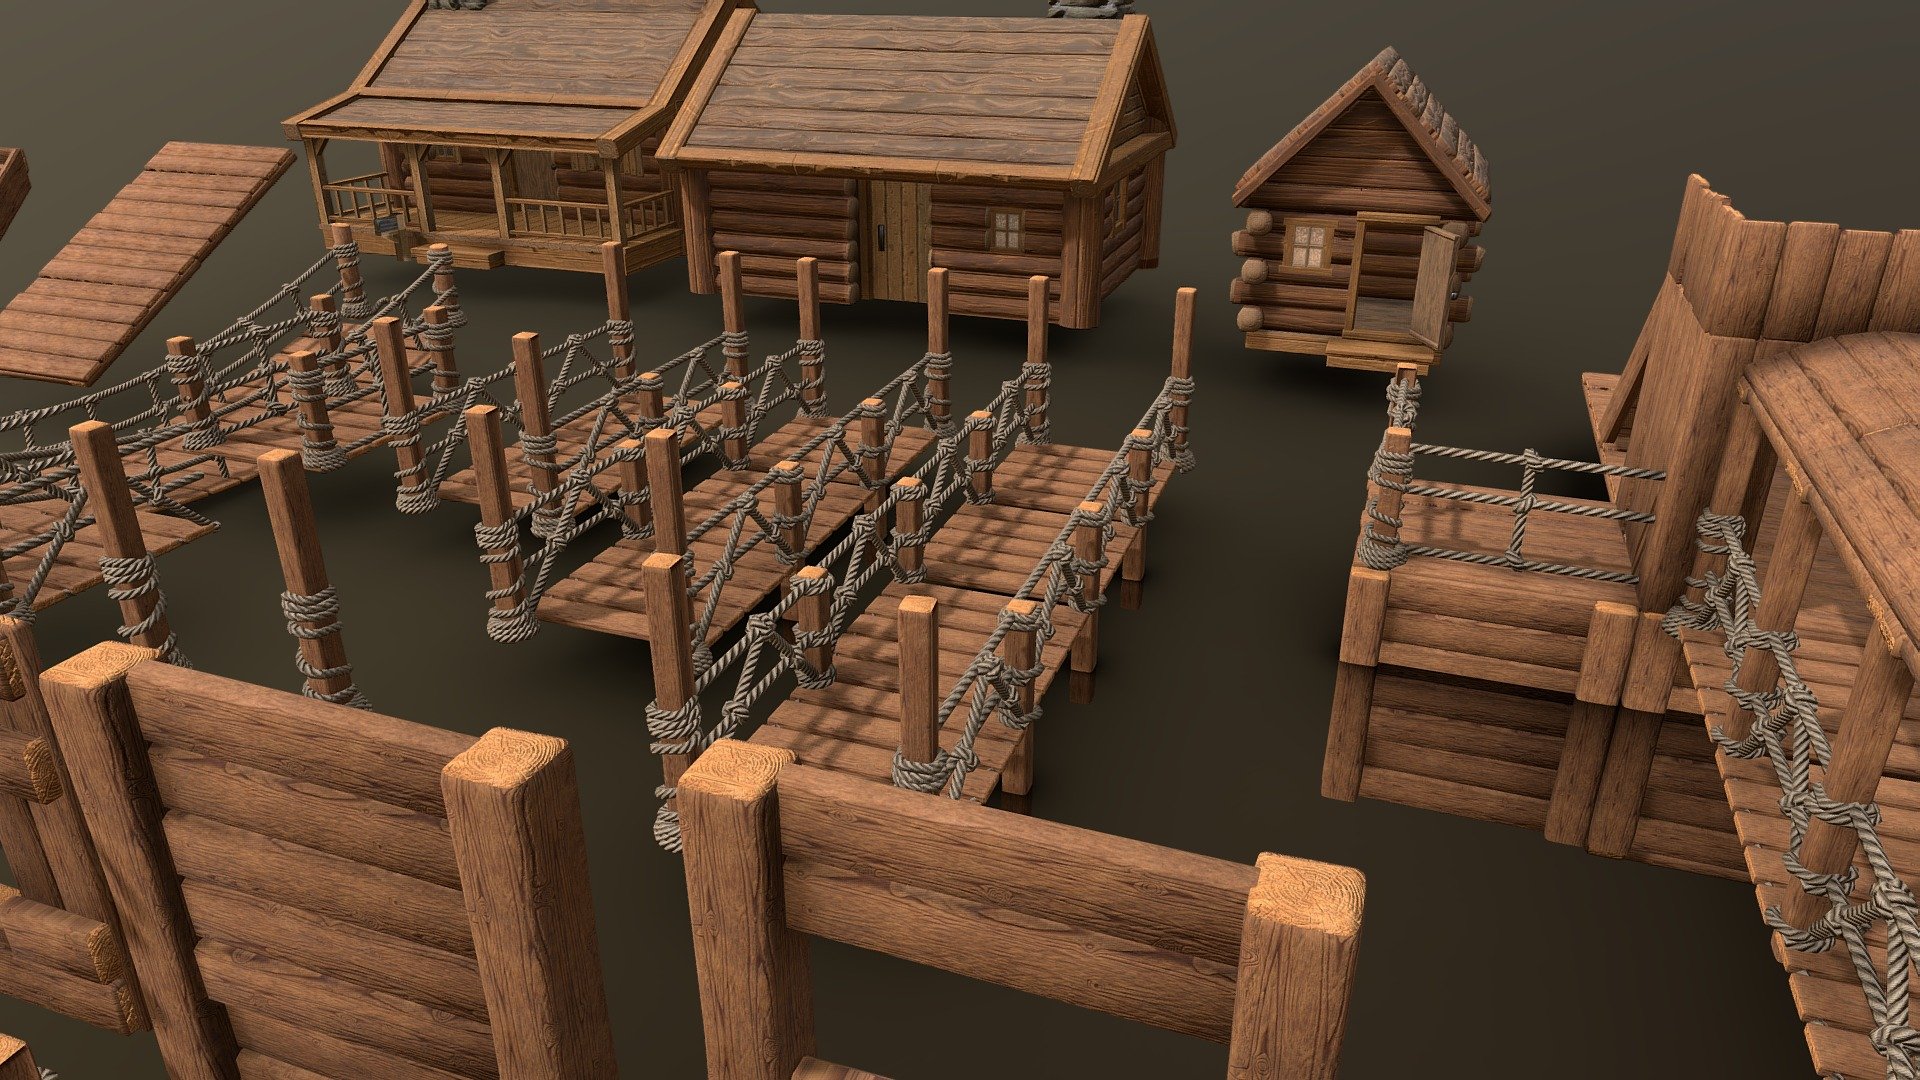 Quickly create a clean and stylized adventure game, tree house or and entire creative mode within a game with this stylized and easy to use kit. All models utilize one optimized texture set with detailed, clean and low poly geometry.

This kit includes wooden and rope elements including; walls, floors, ceilings, roofs, railings, stairs, ladders, beams, bridges and more…

You can find just the Fort Kit Here
And just the Cabins Here

If you have any questions about this kit feel free to reach out to me - Modular Wooden Fort Pack w/ Cabins [35+ Parts] - Buy Royalty Free 3D model by CleanCraft3D (@CleanCraft_3D) 3d model